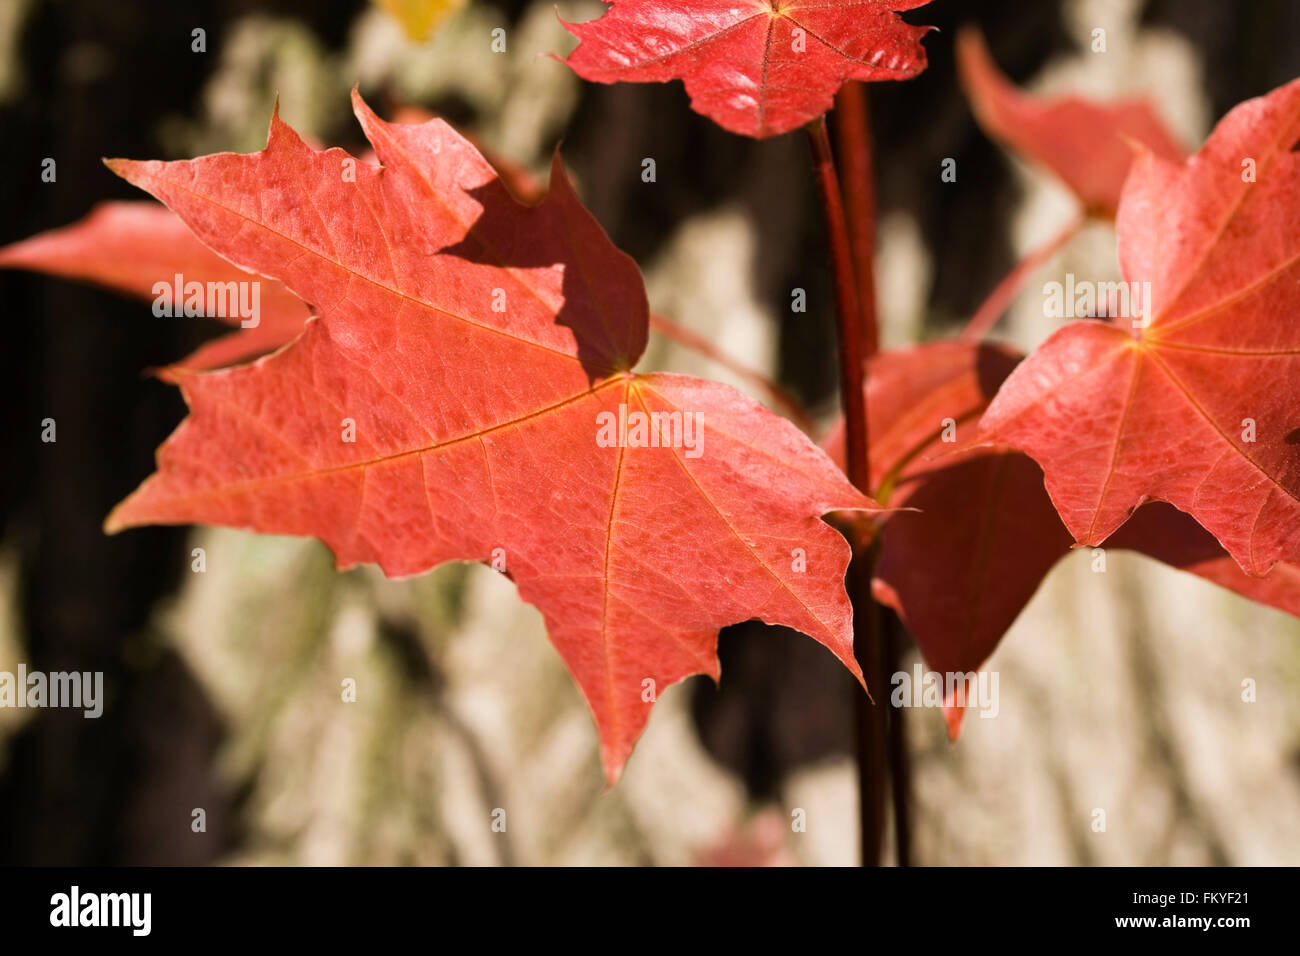 Closeup view of red maple leaves with shallow depth of field. Stock Photo